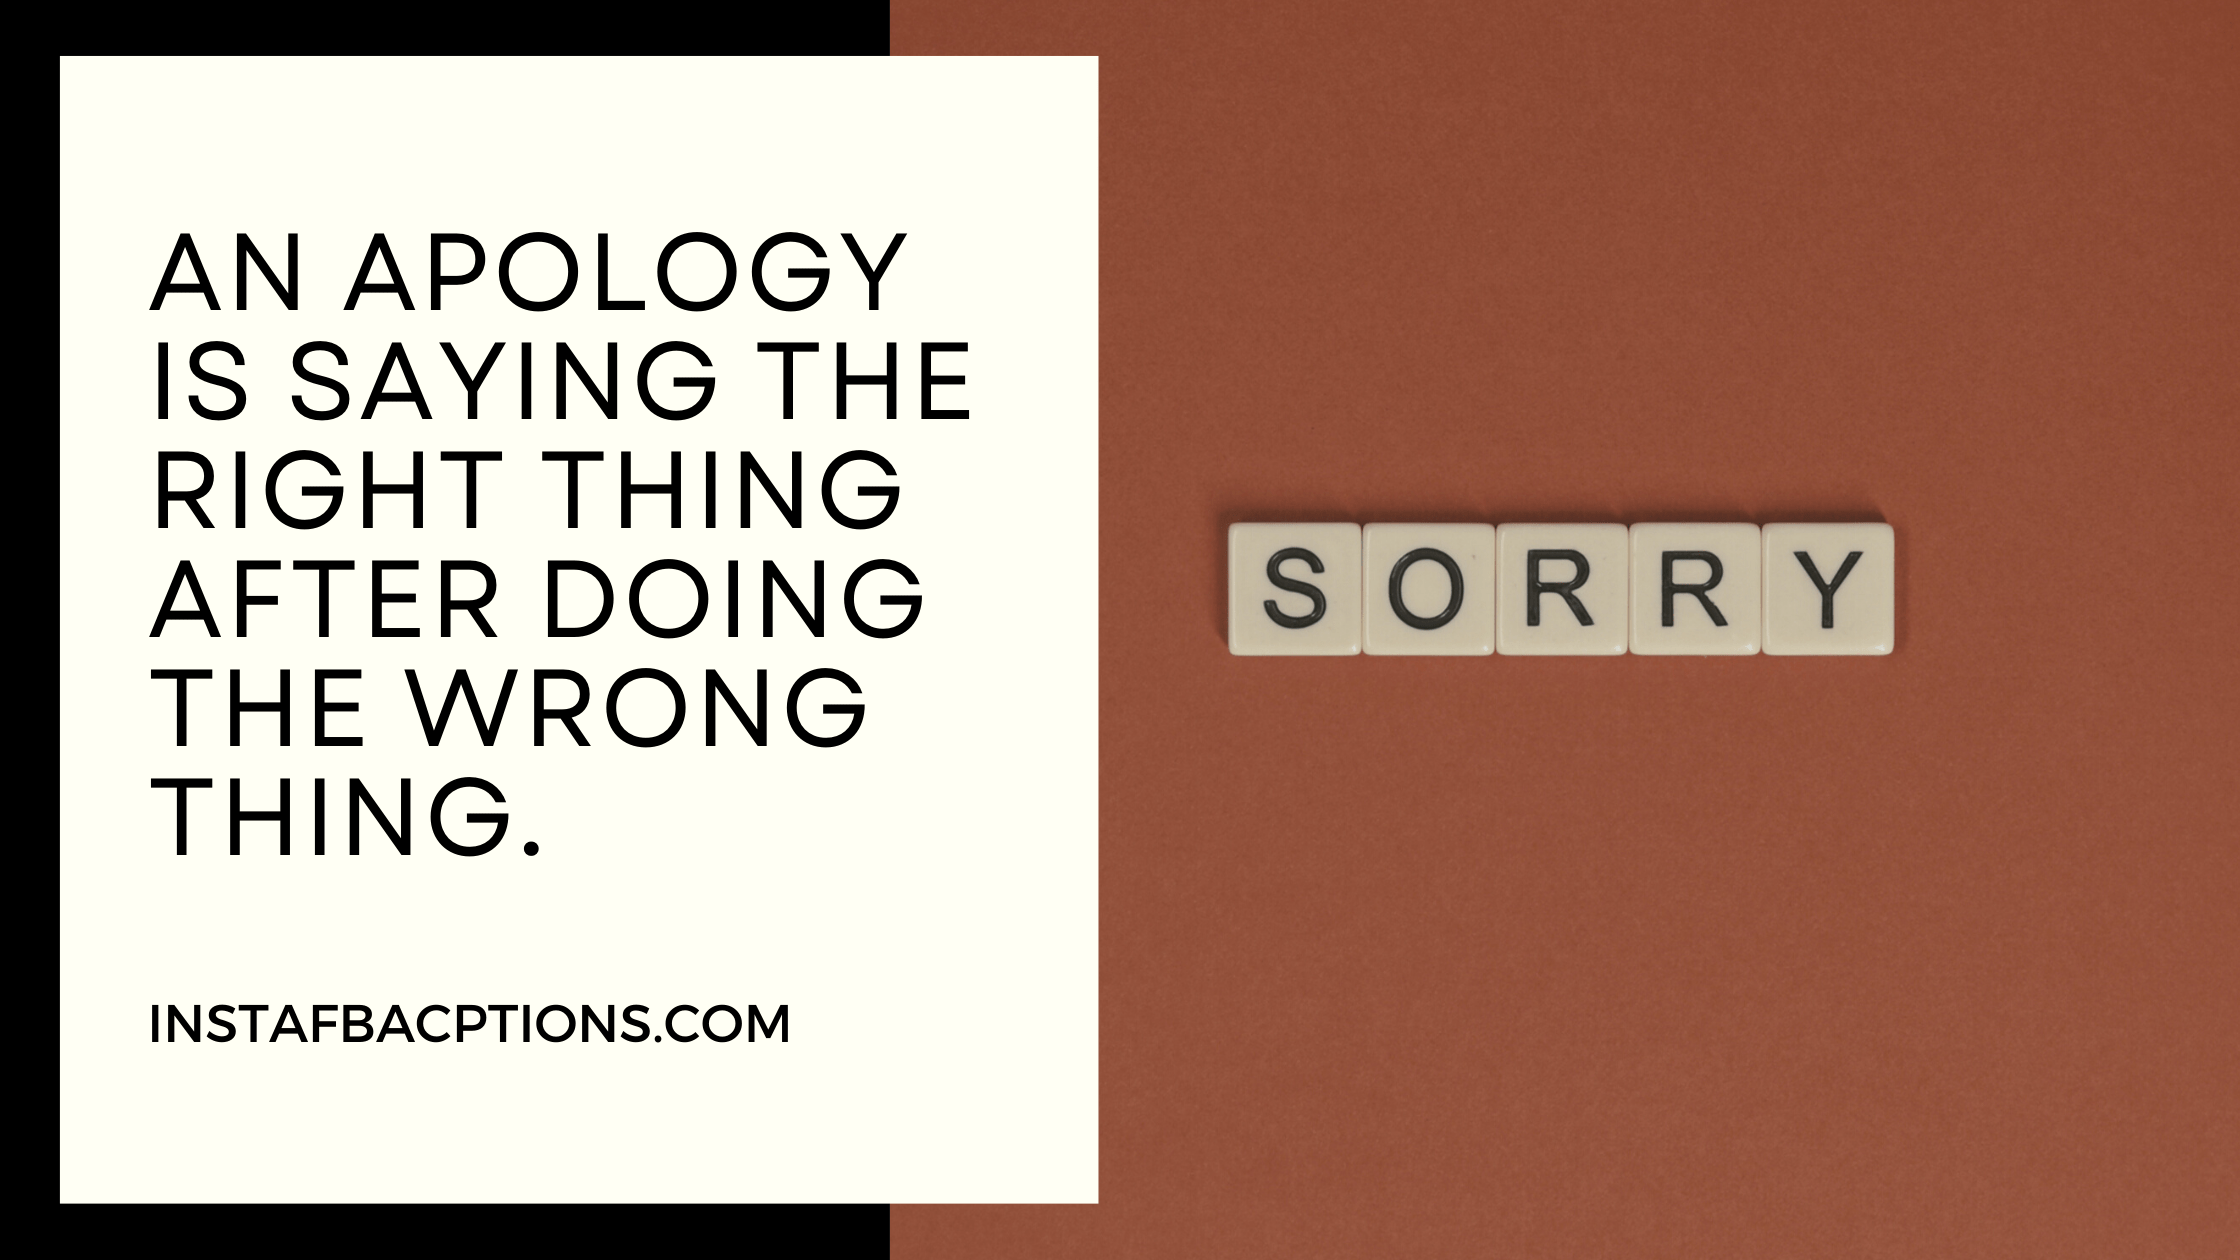 Sad Apology Captions  - Sad Apology Captions - 98+ Sorry Apology Instagram Captions and Quotes in 2022